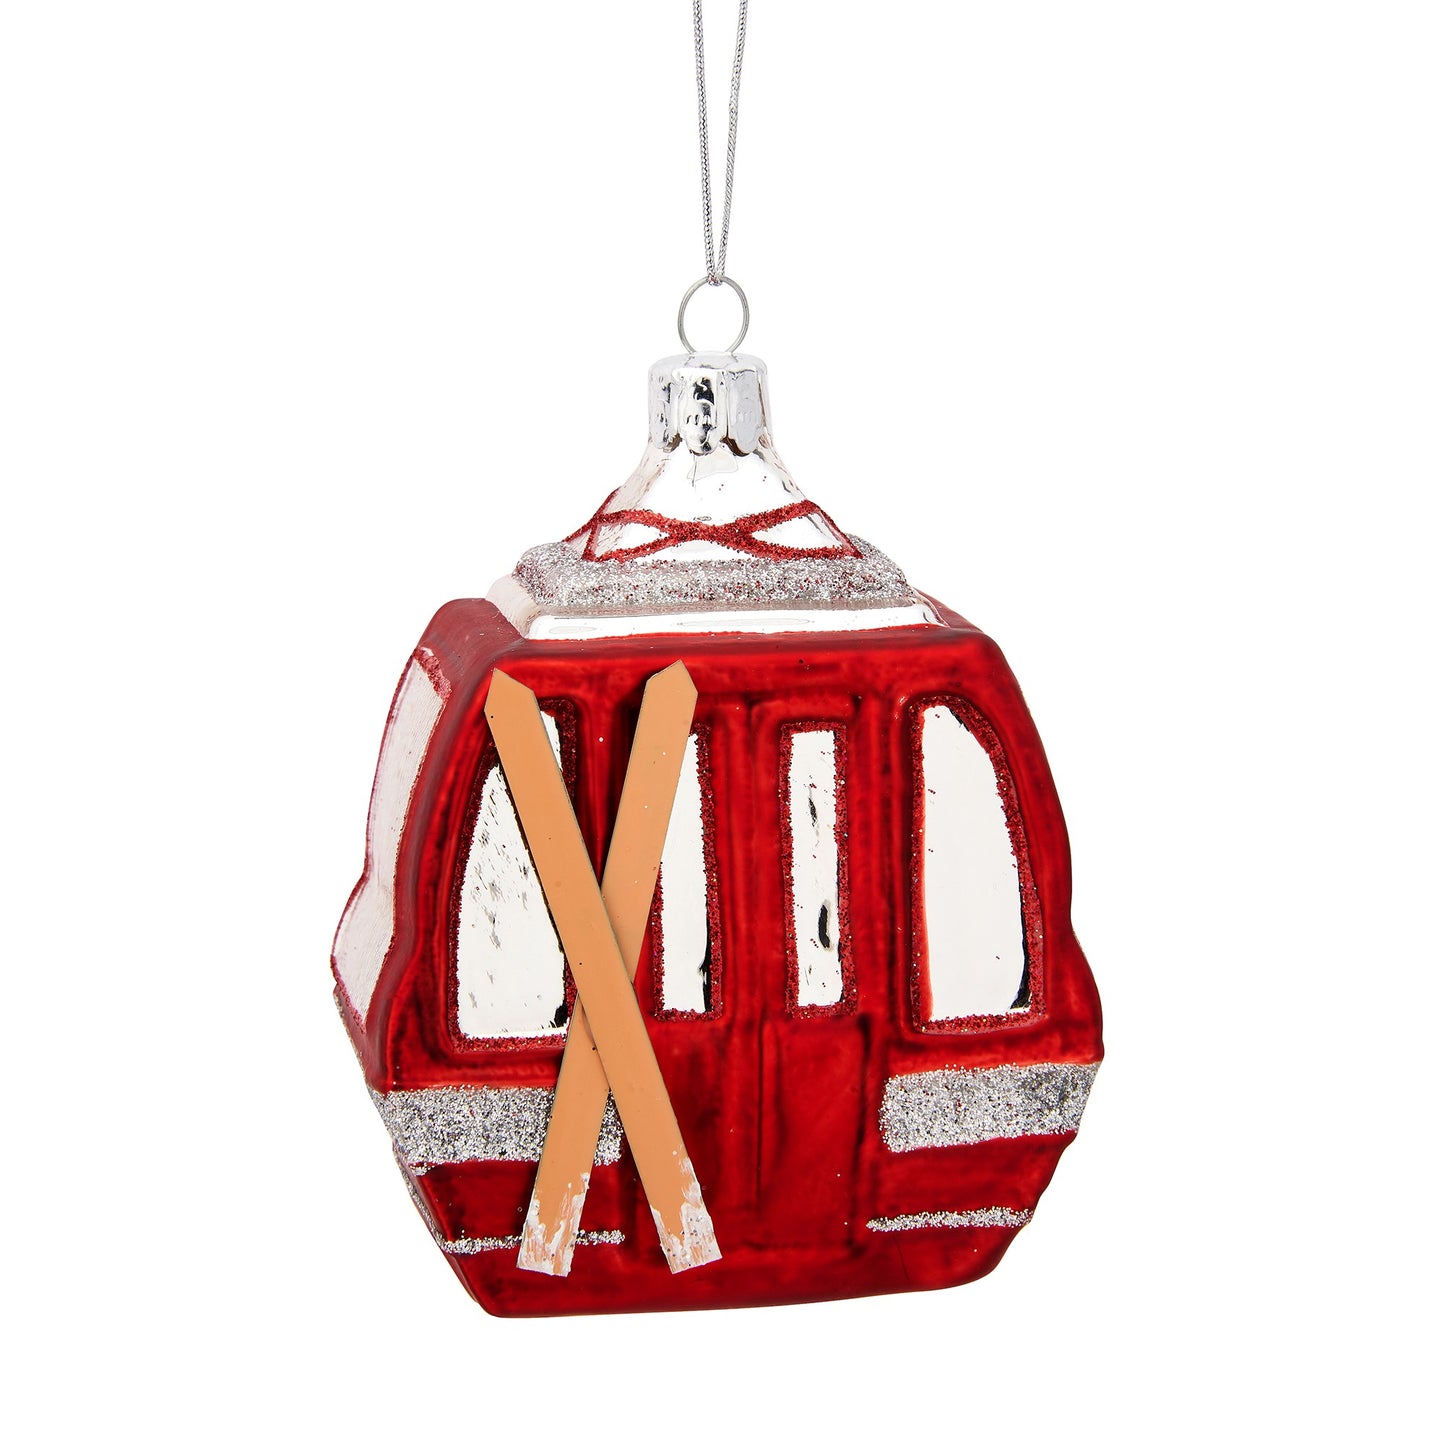 This is pretty niche, but for all you winter adrenaline junkies out there, this red and silver cable car/ski lift could make a quirky addition to your Christmas tree decorations this year!